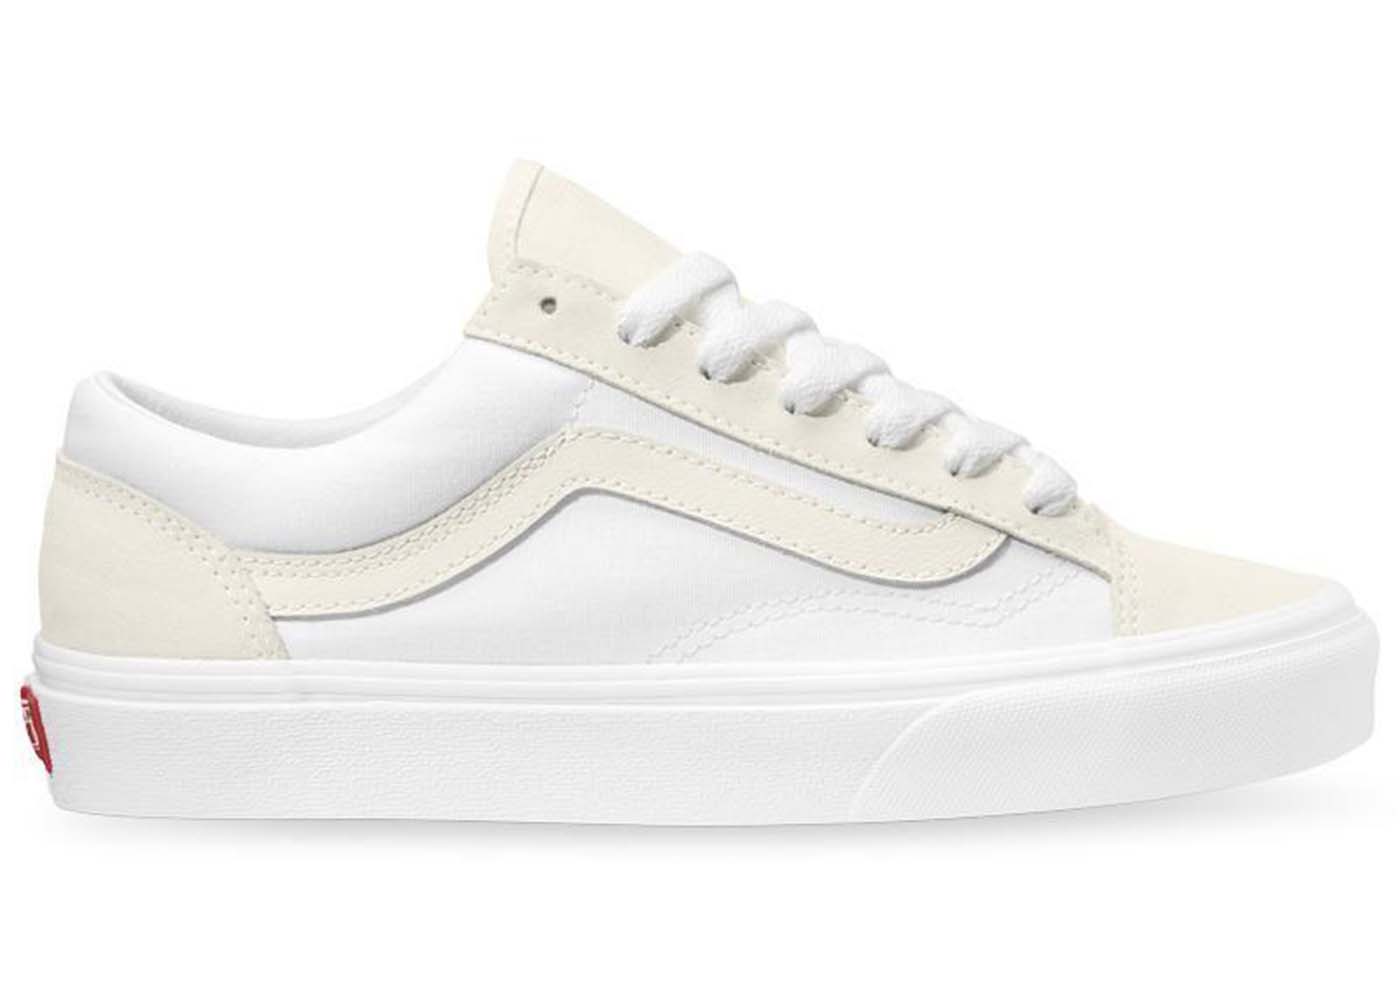 Vans Style 36 Marshmallow True White - VN0A54F69LX - US